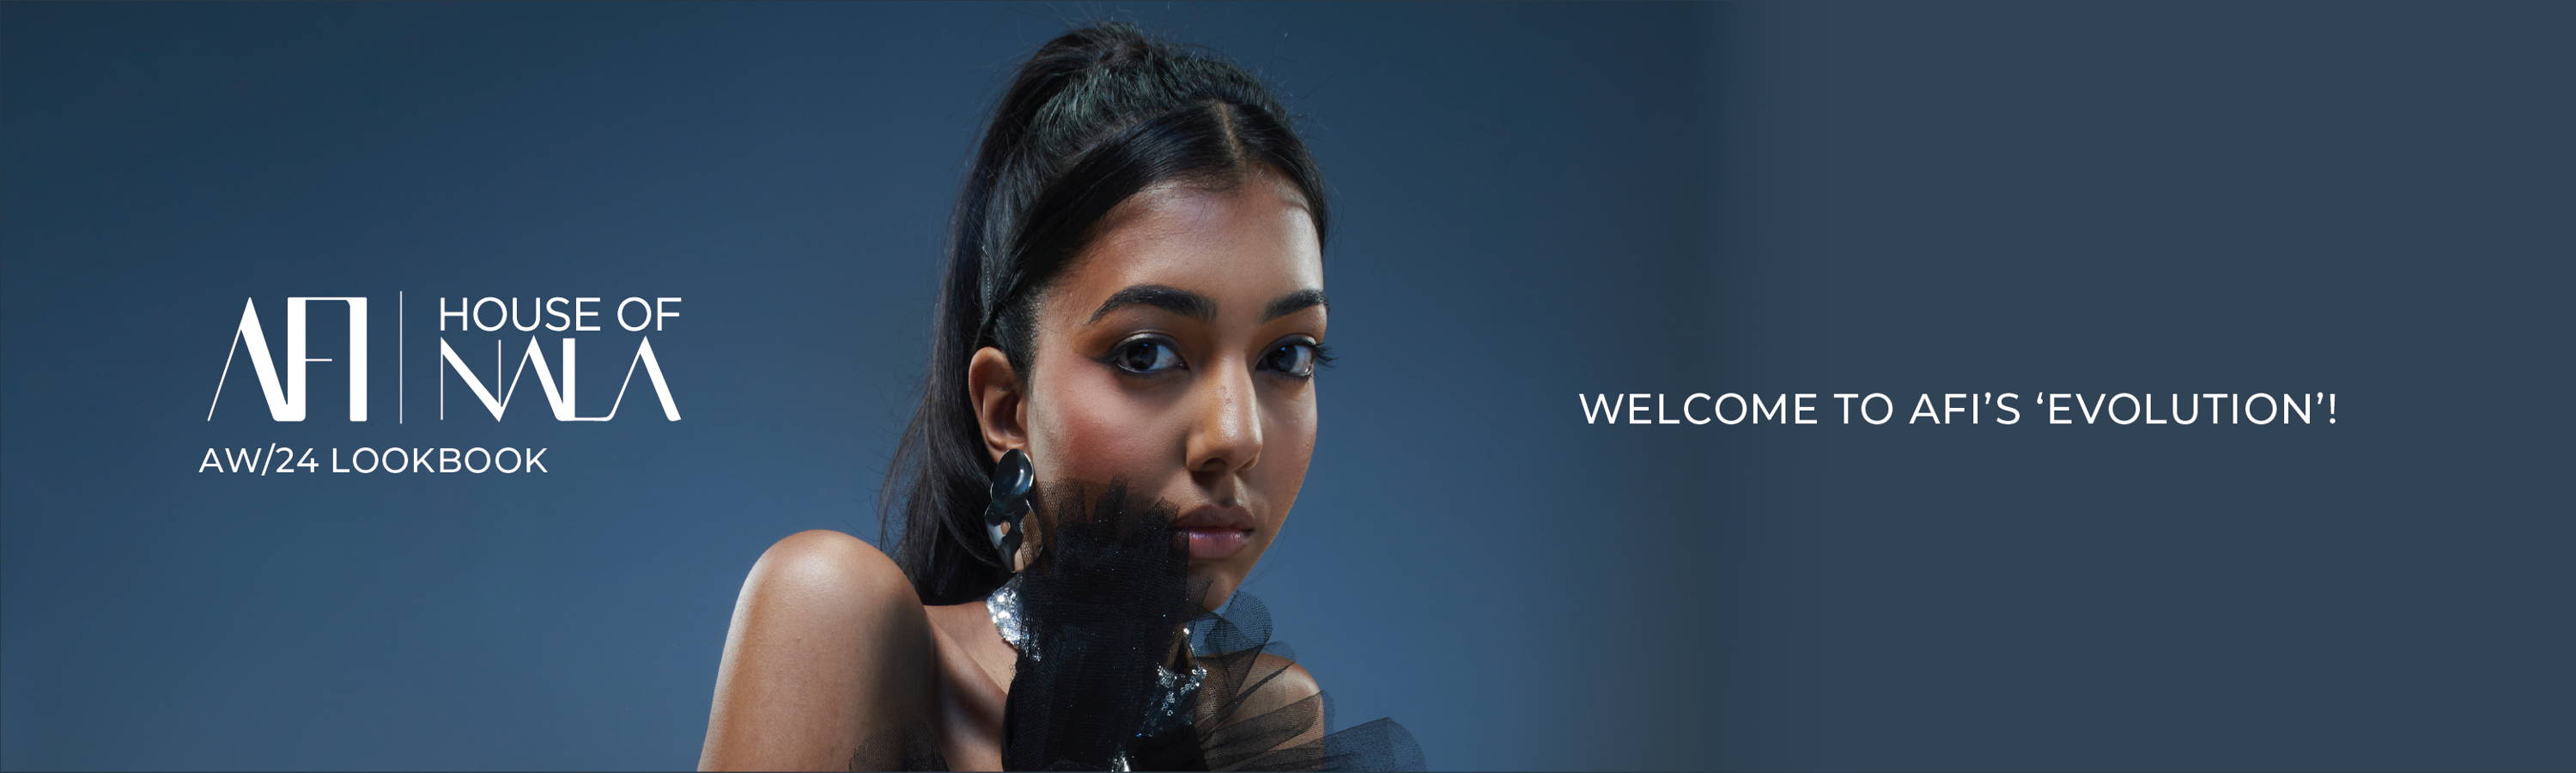 Model, Natanya Chetty wearing a silver dress with black tulle, sitting down in front of a grey background. The banner image has writing: 